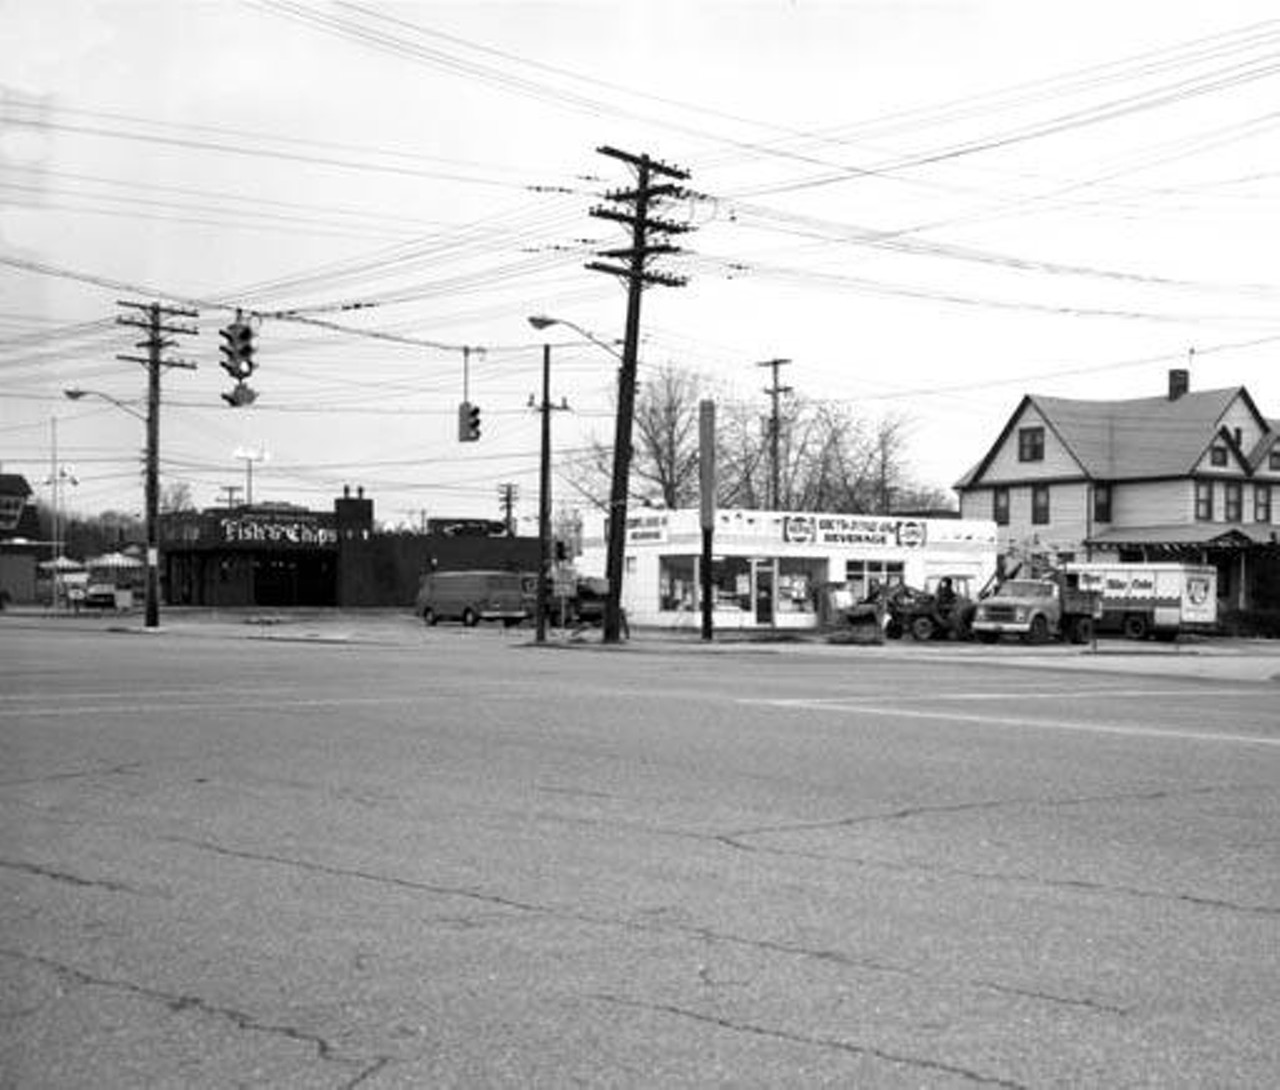 Looking towards Eddy's Drive-in Beverage Store on the southwest corner of the West 117th St. (Highland Ave.) and Madison Ave. intersection. c. 1964